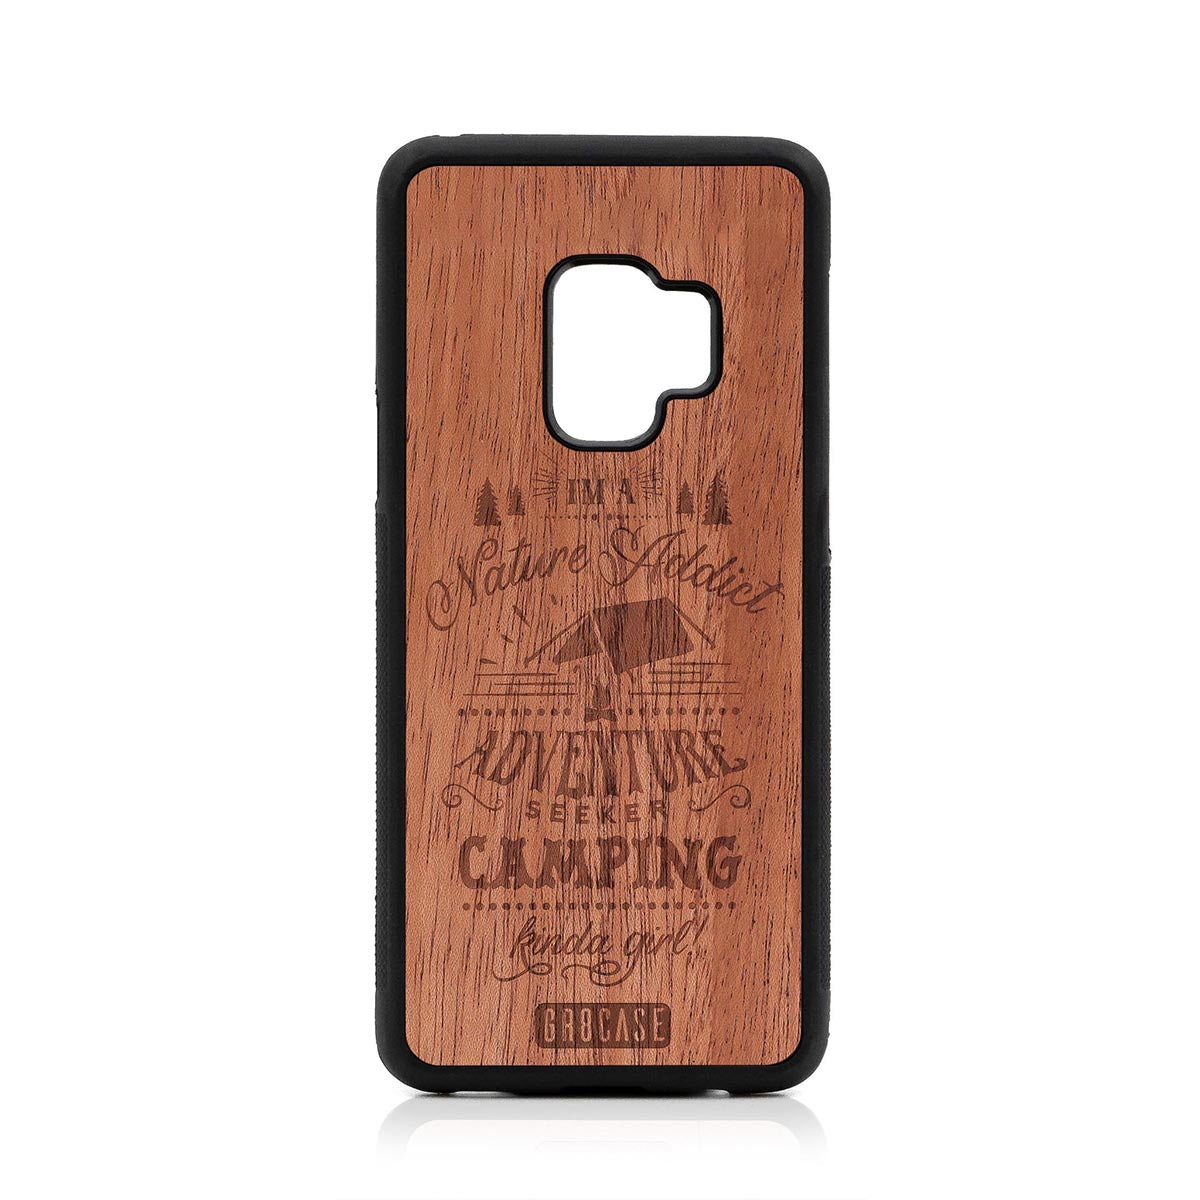 I'm A Nature Addict Adventure Seeker Camping Kinda Girl Design Wood Case Samsung Galaxy S9 by GR8CASE